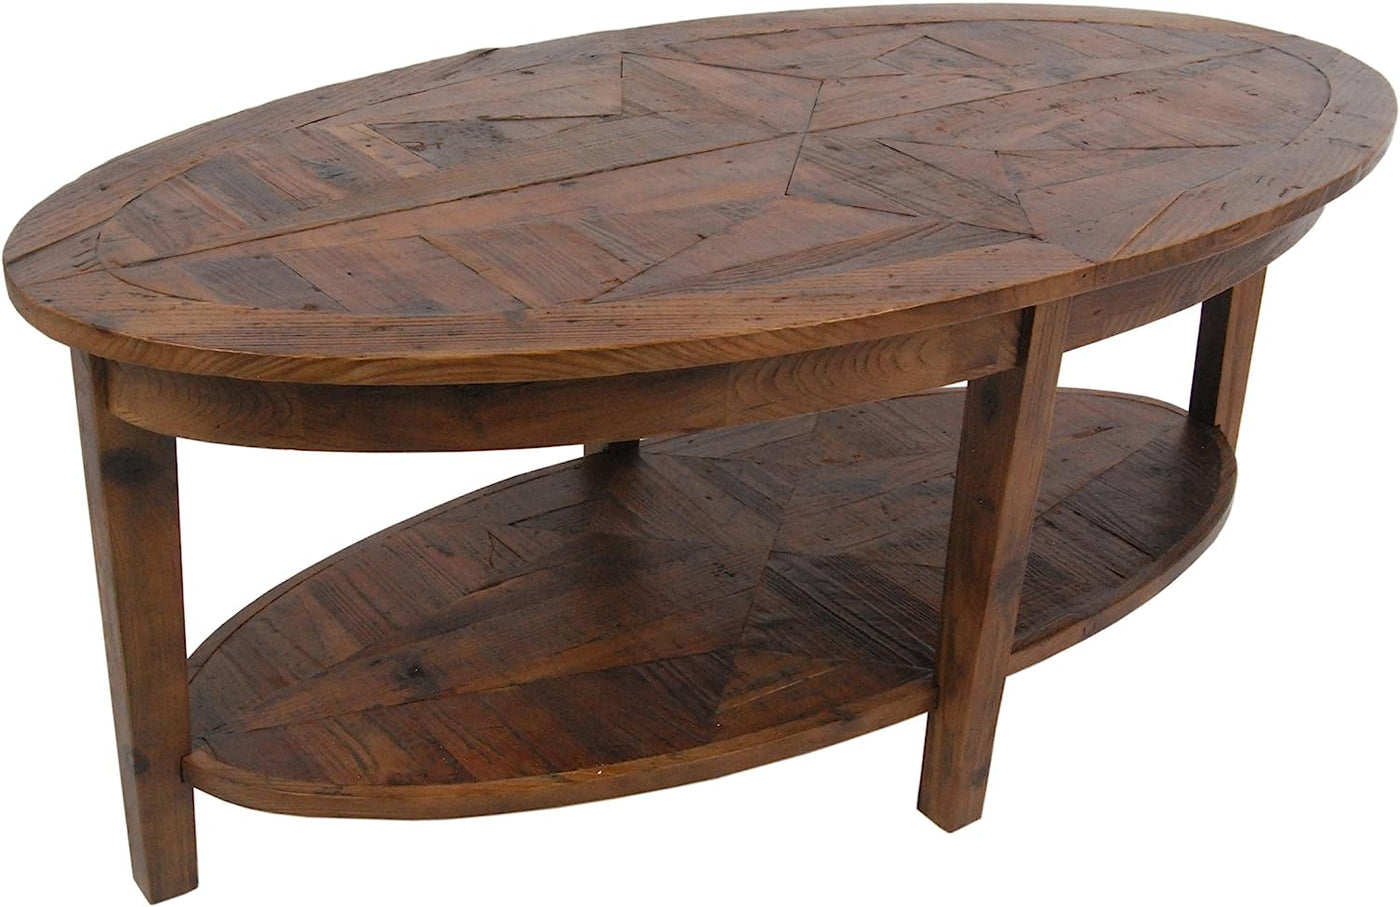 Renew Reclaimed Wood 48" L Oval Coffee Table, Natural-$200